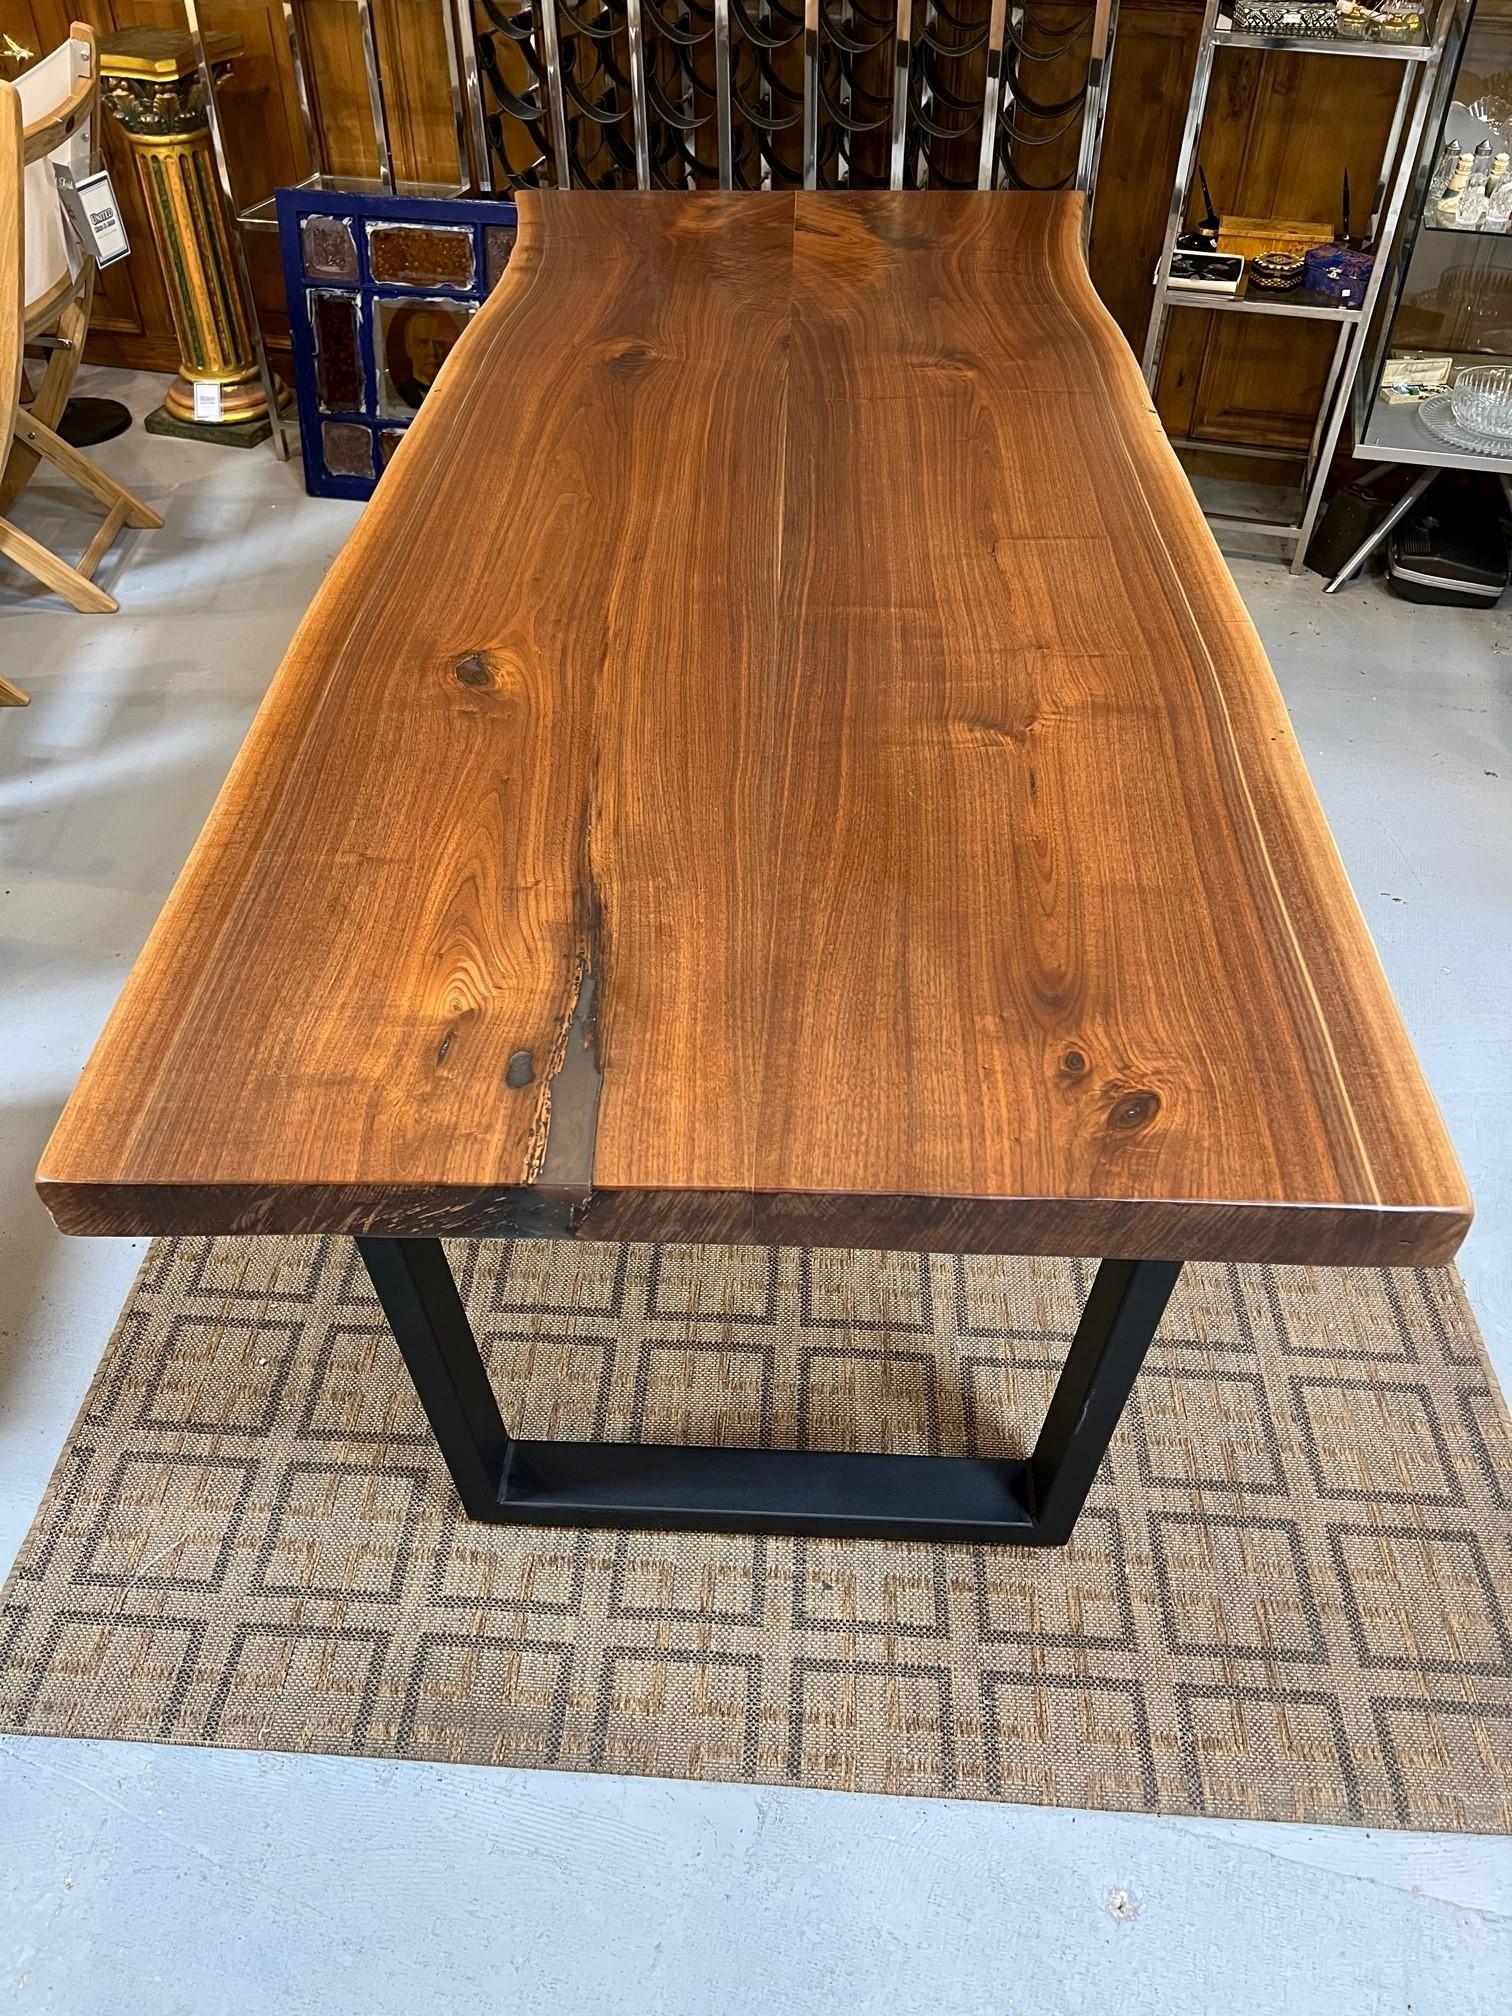 A new Walnut live edge dining table with a metal base made by the Amish in Lancaster PA. Live edge or living edge refers to the incorporation of the natural profile of the tree into at least one side of the table. This table is made from two pieces